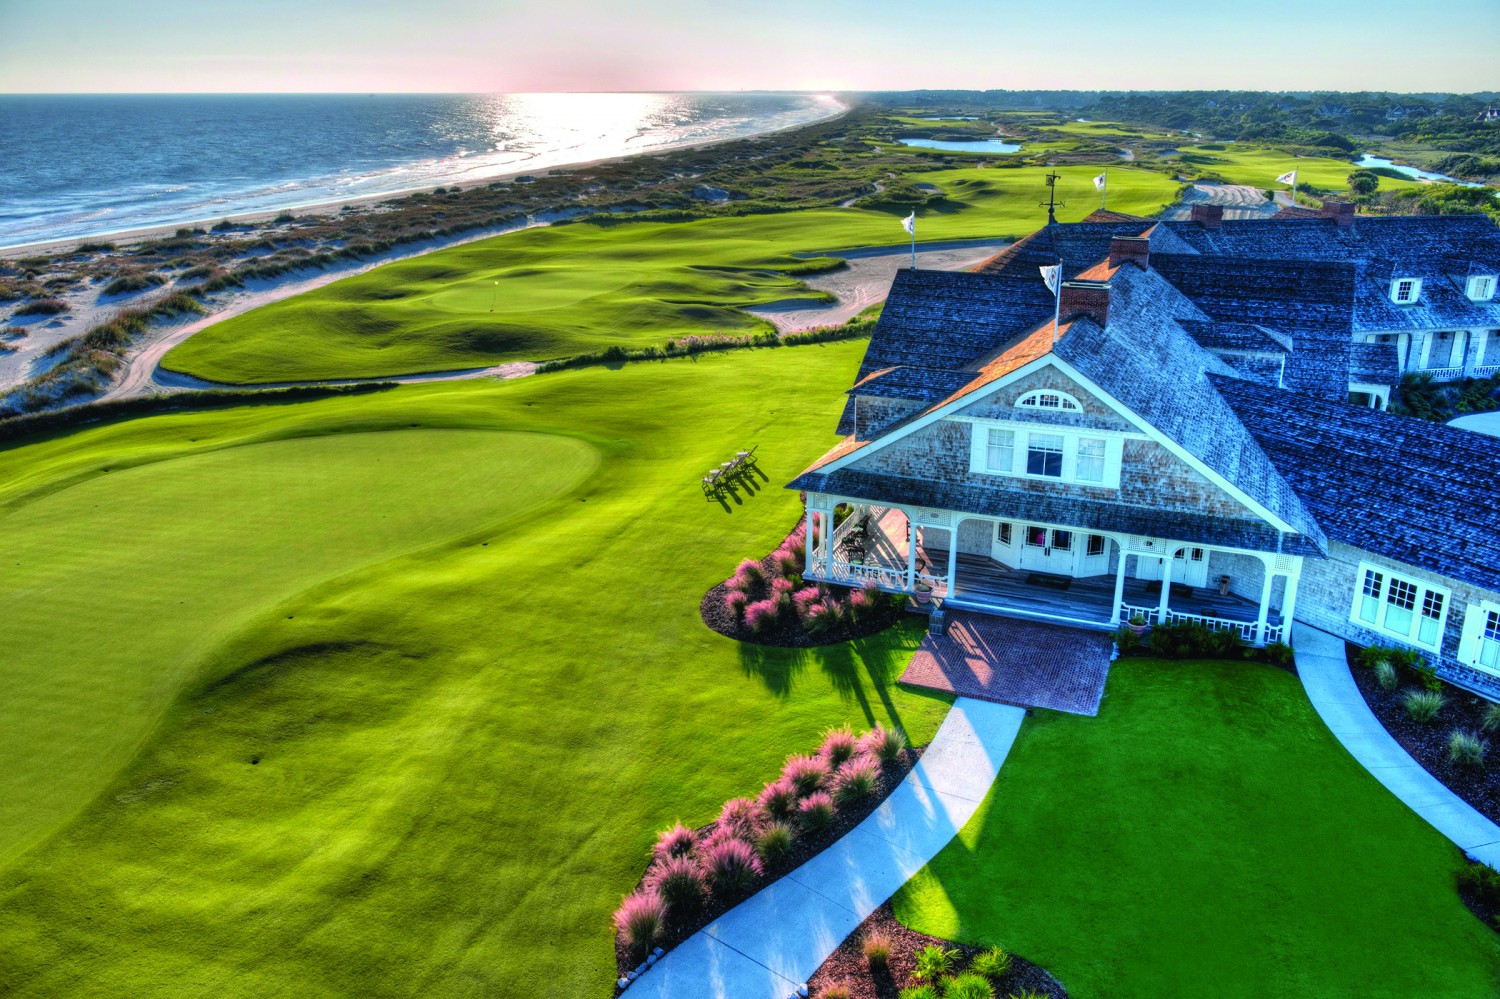 Kiawah Ocean Course Clubhouse & 18th